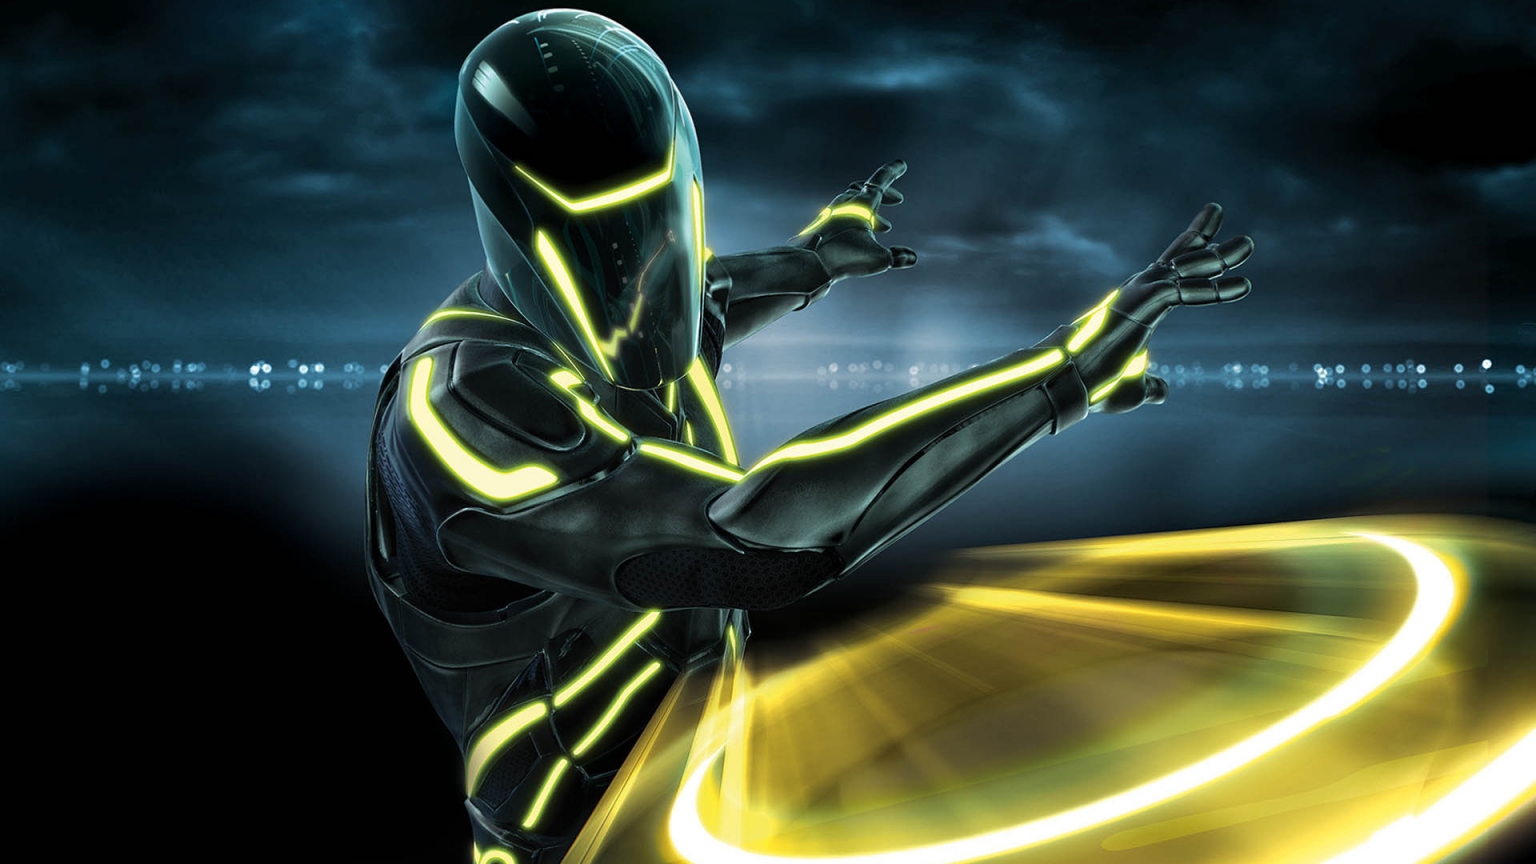 Tron Legacy Clu for 1536 x 864 HDTV resolution